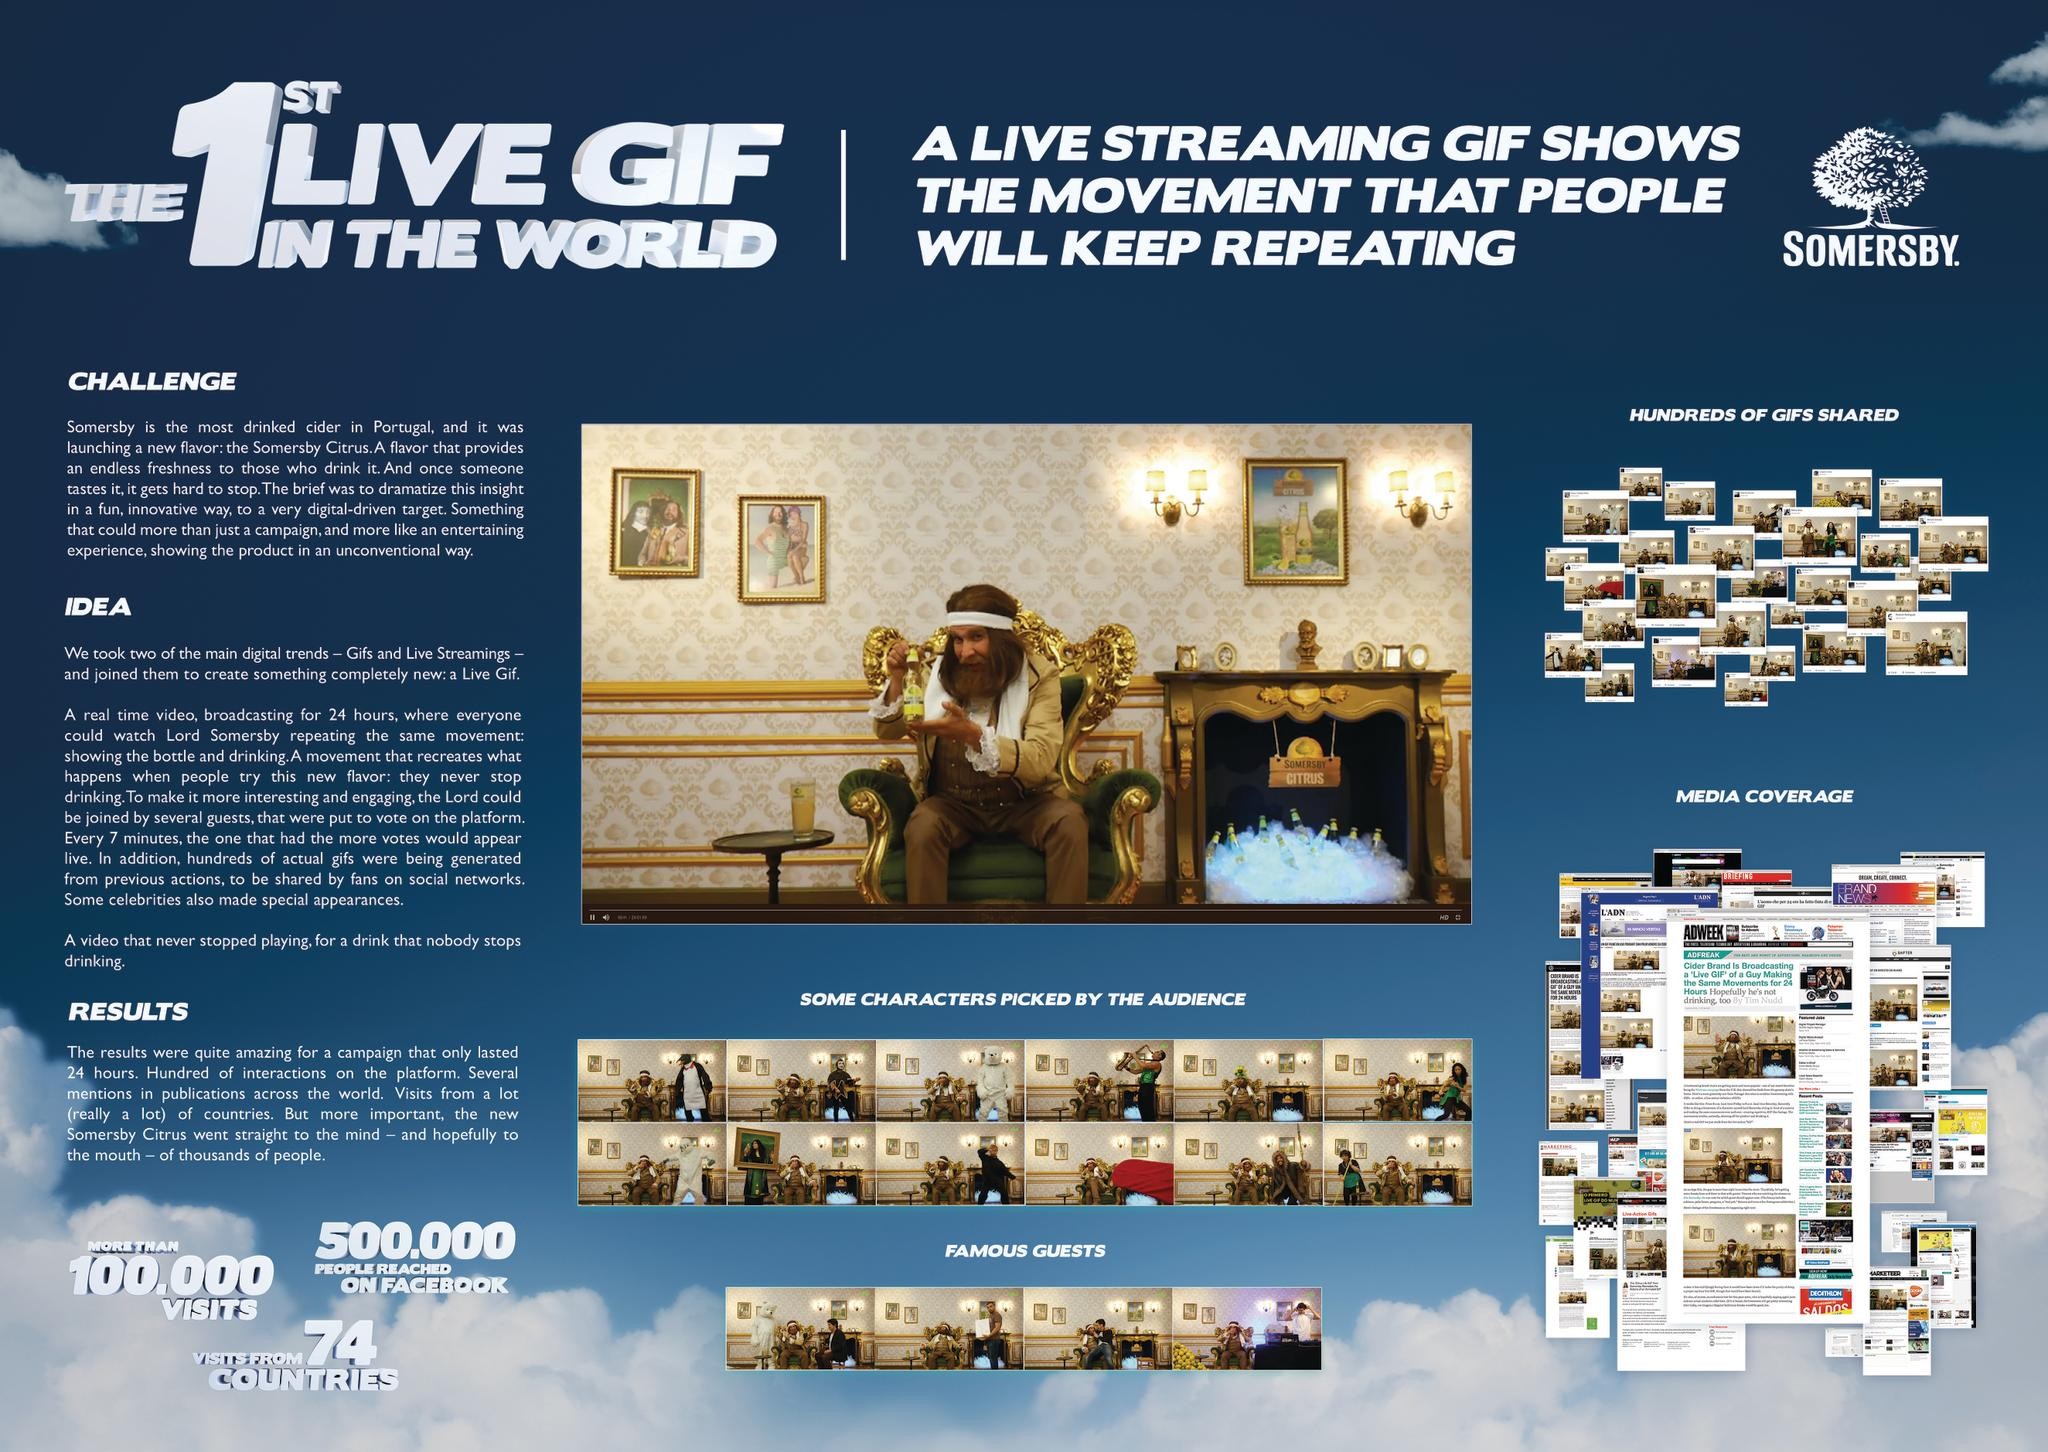 The First Live Gif in the World